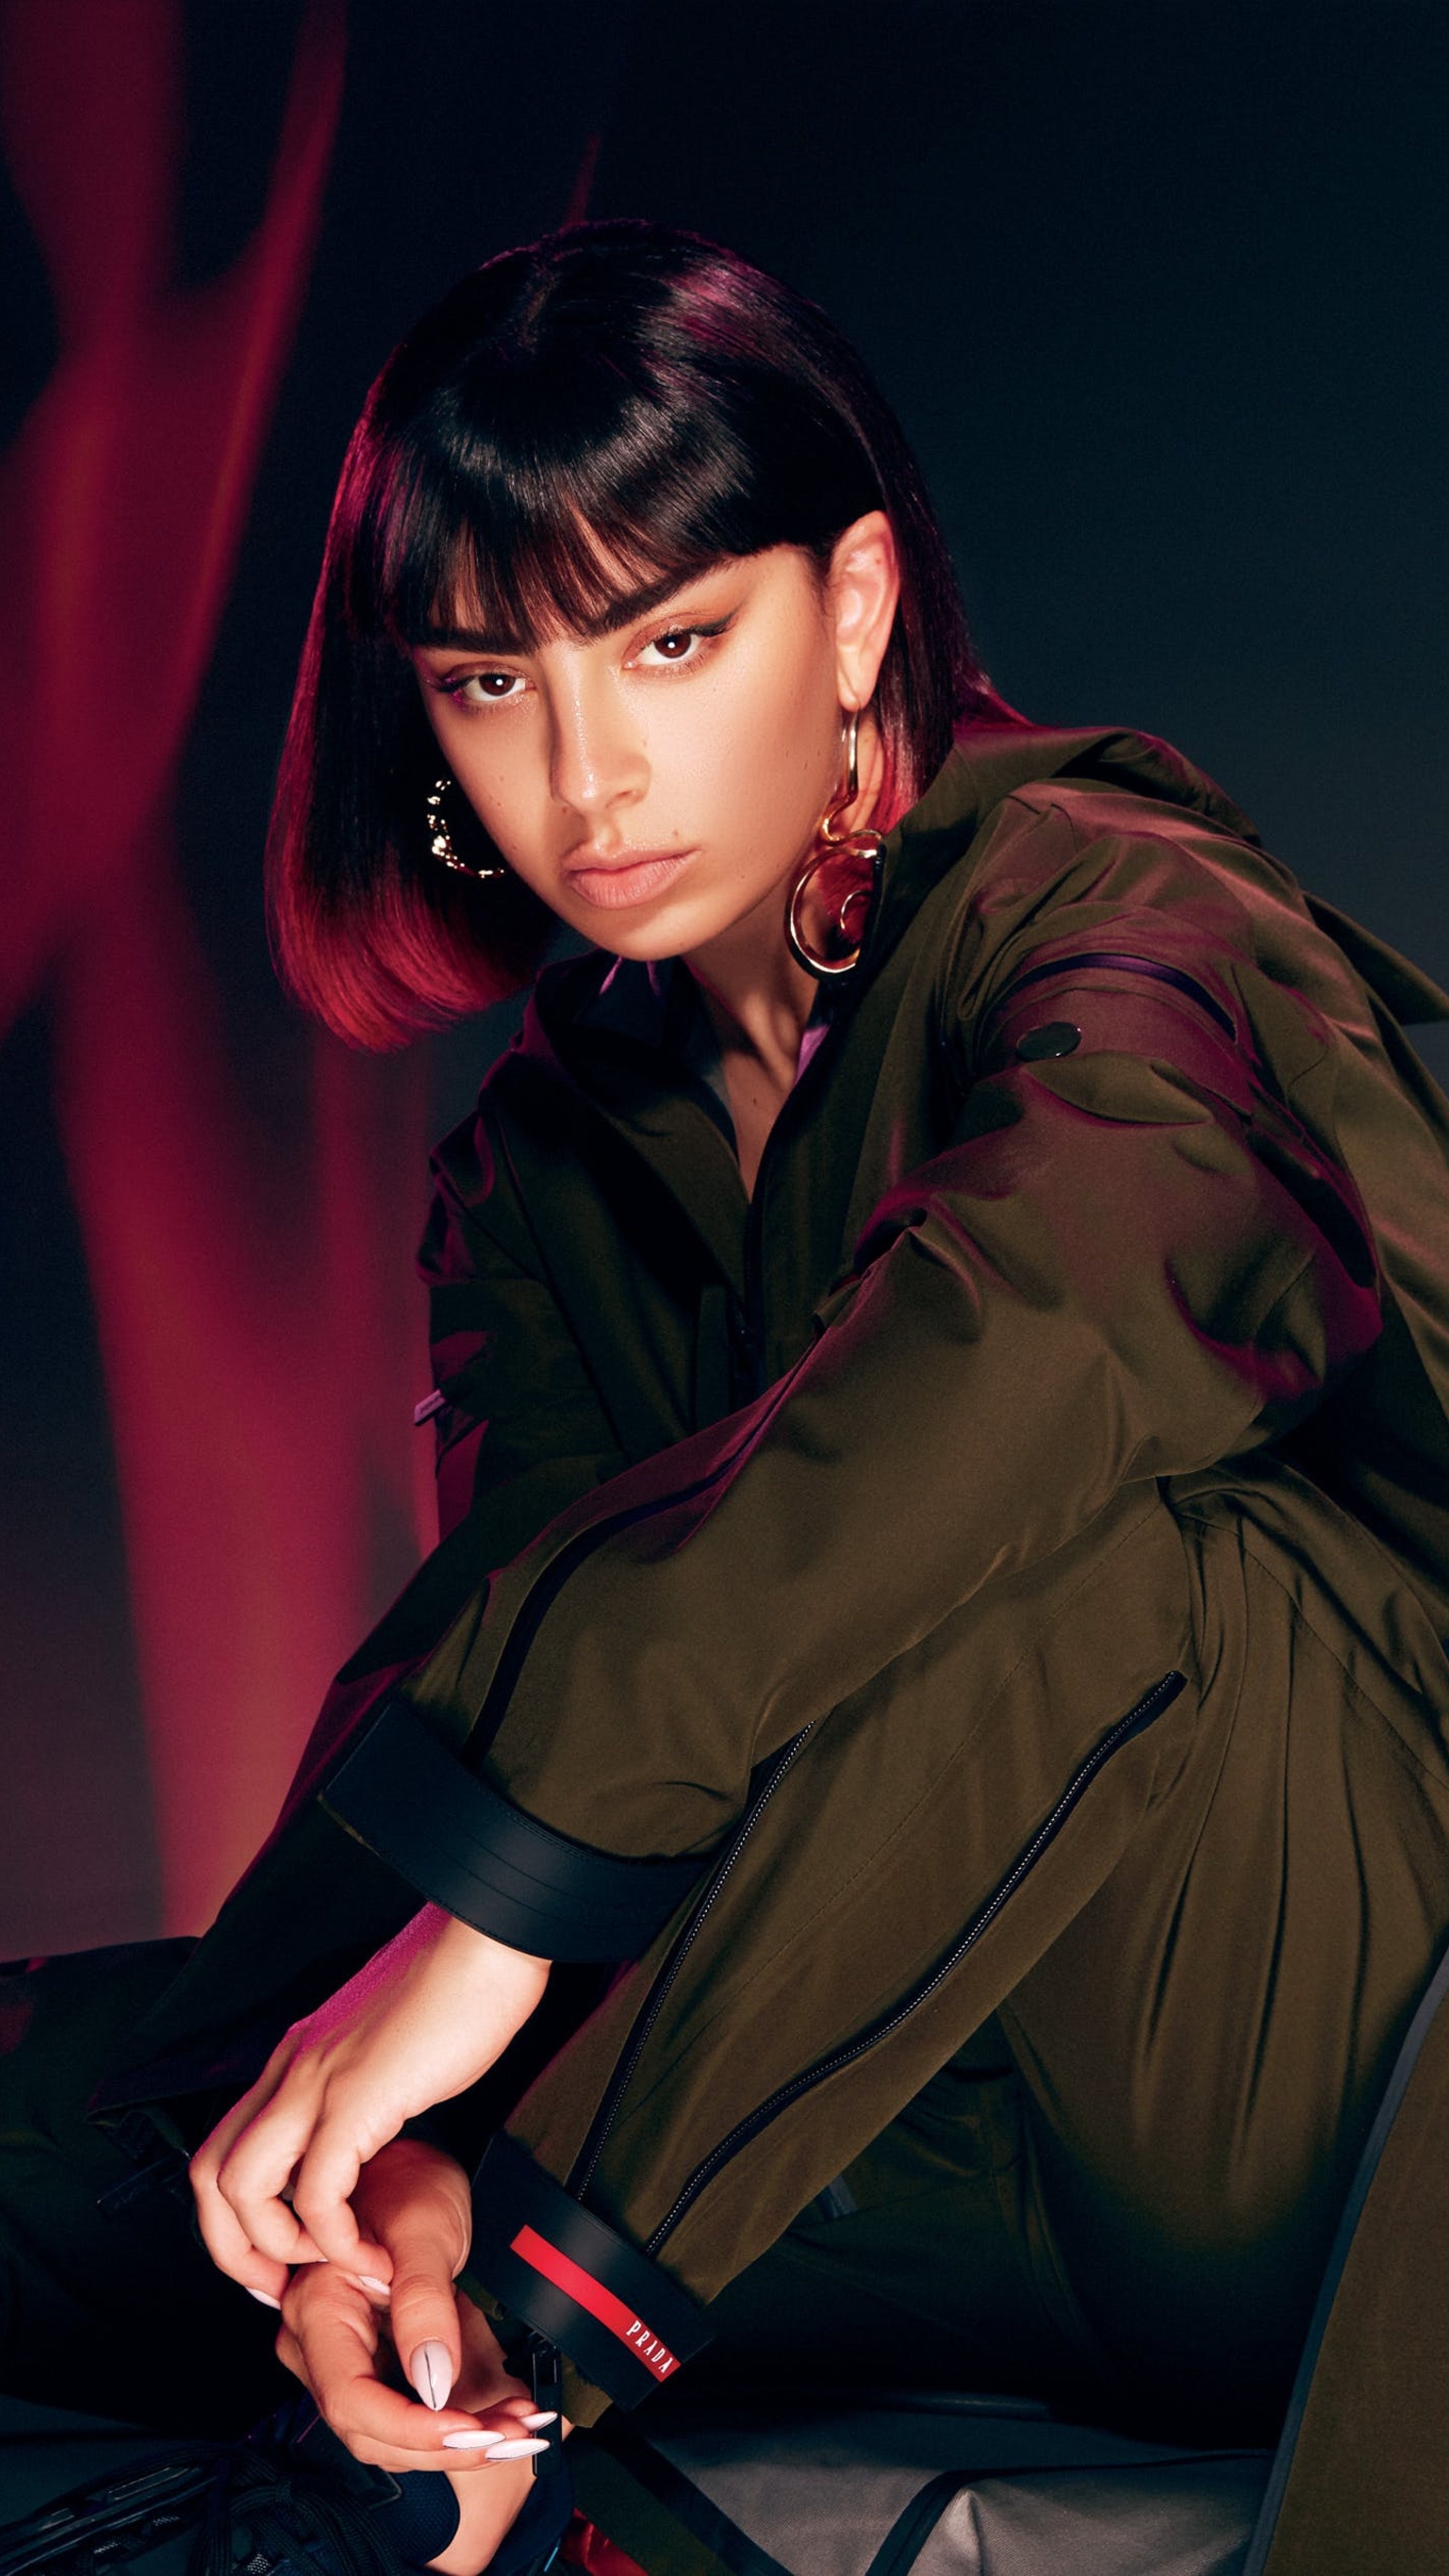 Charli XCX: Rose to prominence with the Icona Pop collaboration "I Love It". 2160x3840 4K Wallpaper.